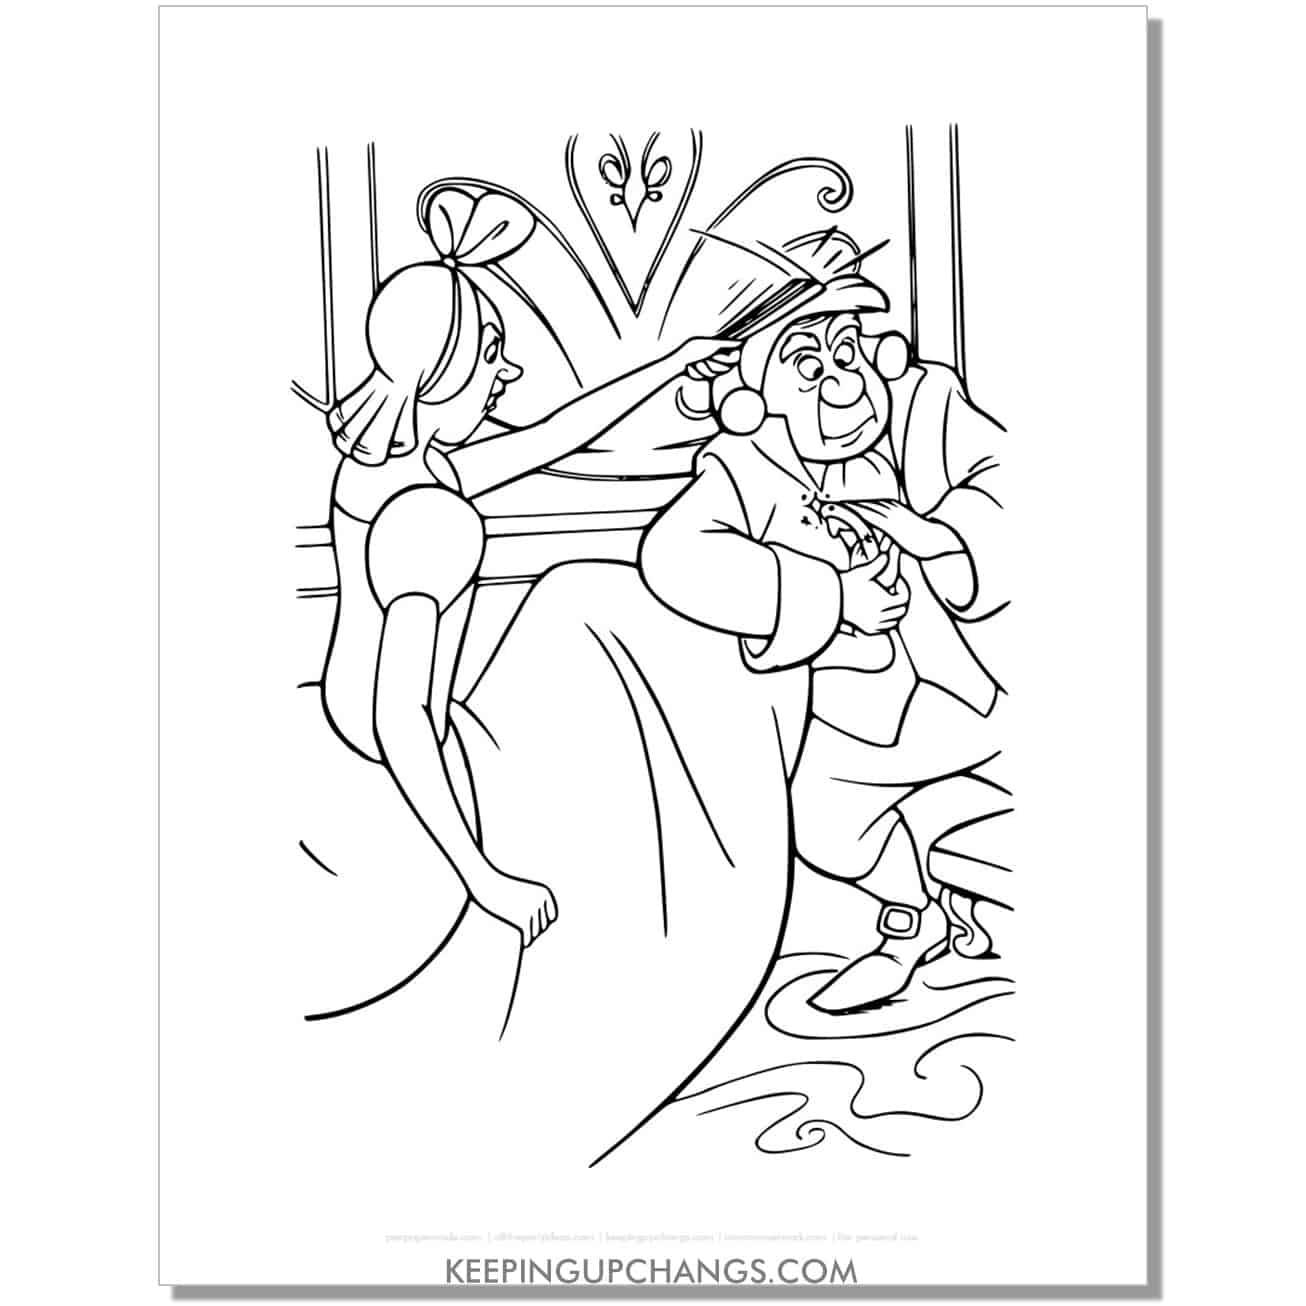 cinderella stepsister hits footman on head coloring page, sheet.